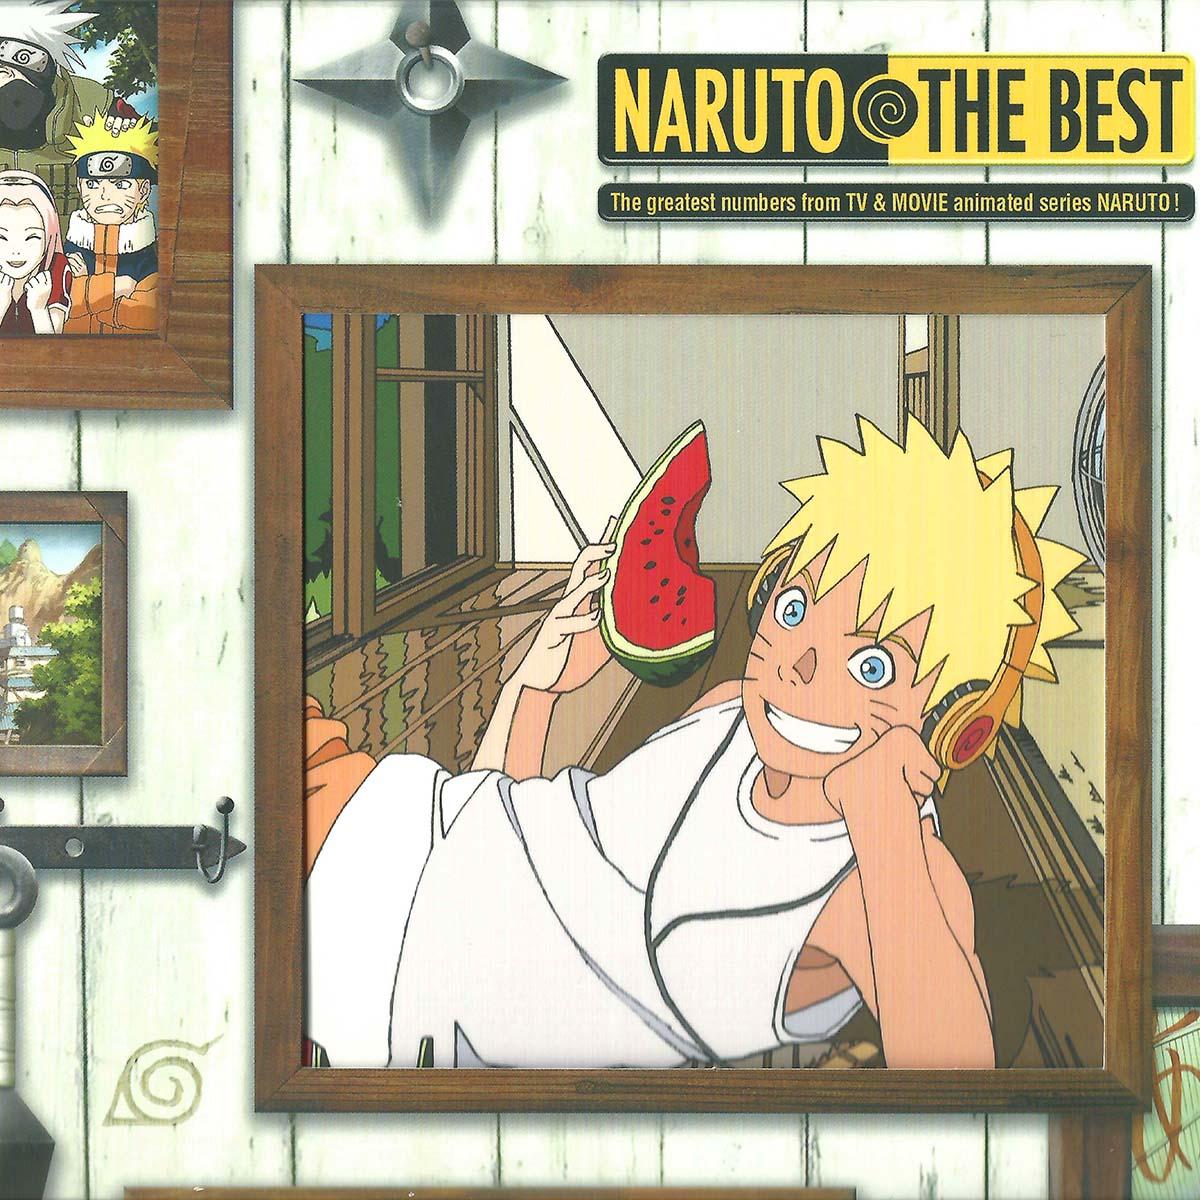 Naruto THE BEST